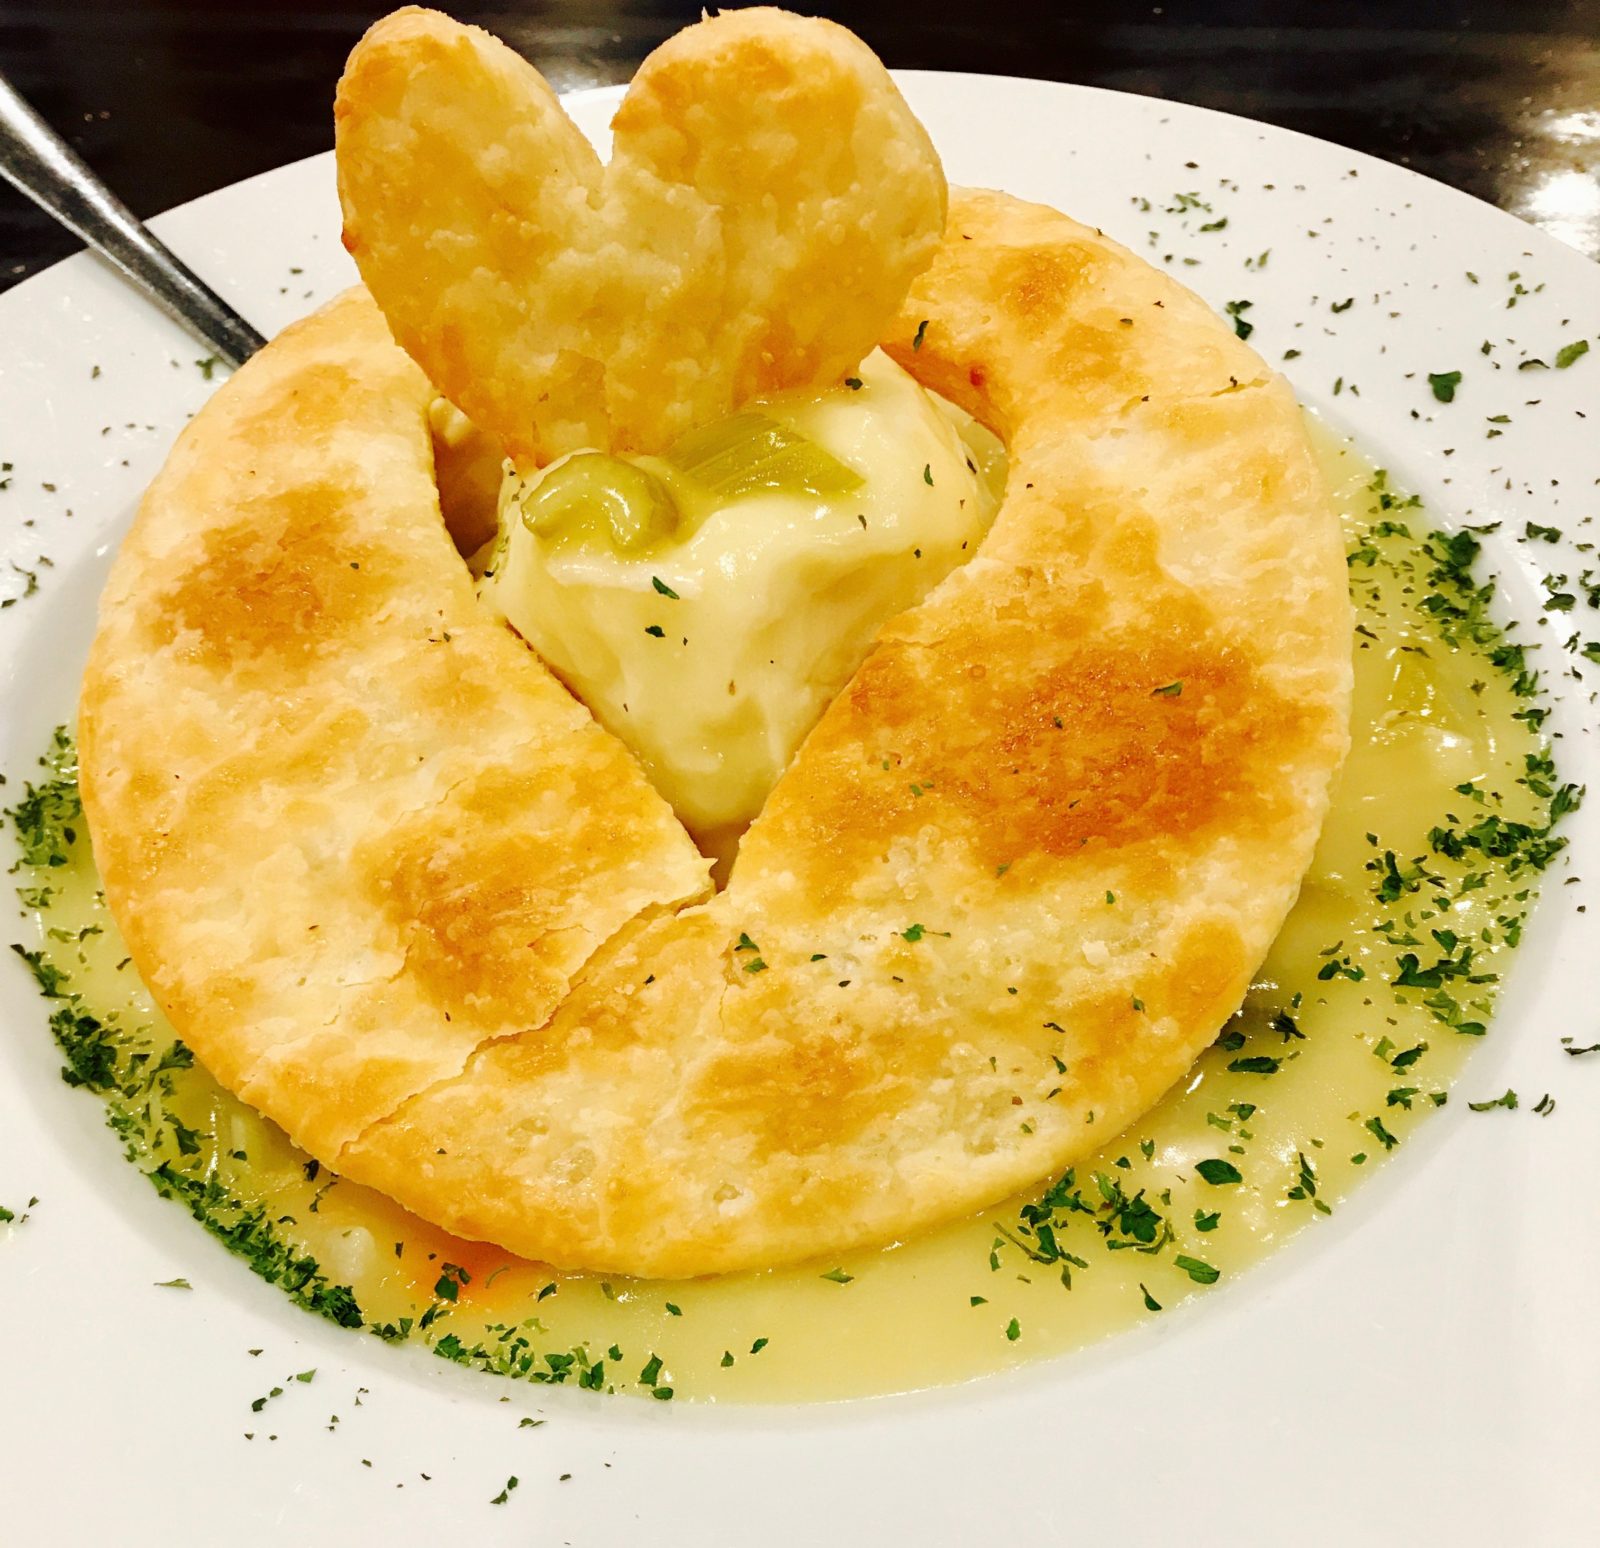 Pick of the Week - Heart & Soul Cafe - Homemade Chicken Pot Pie